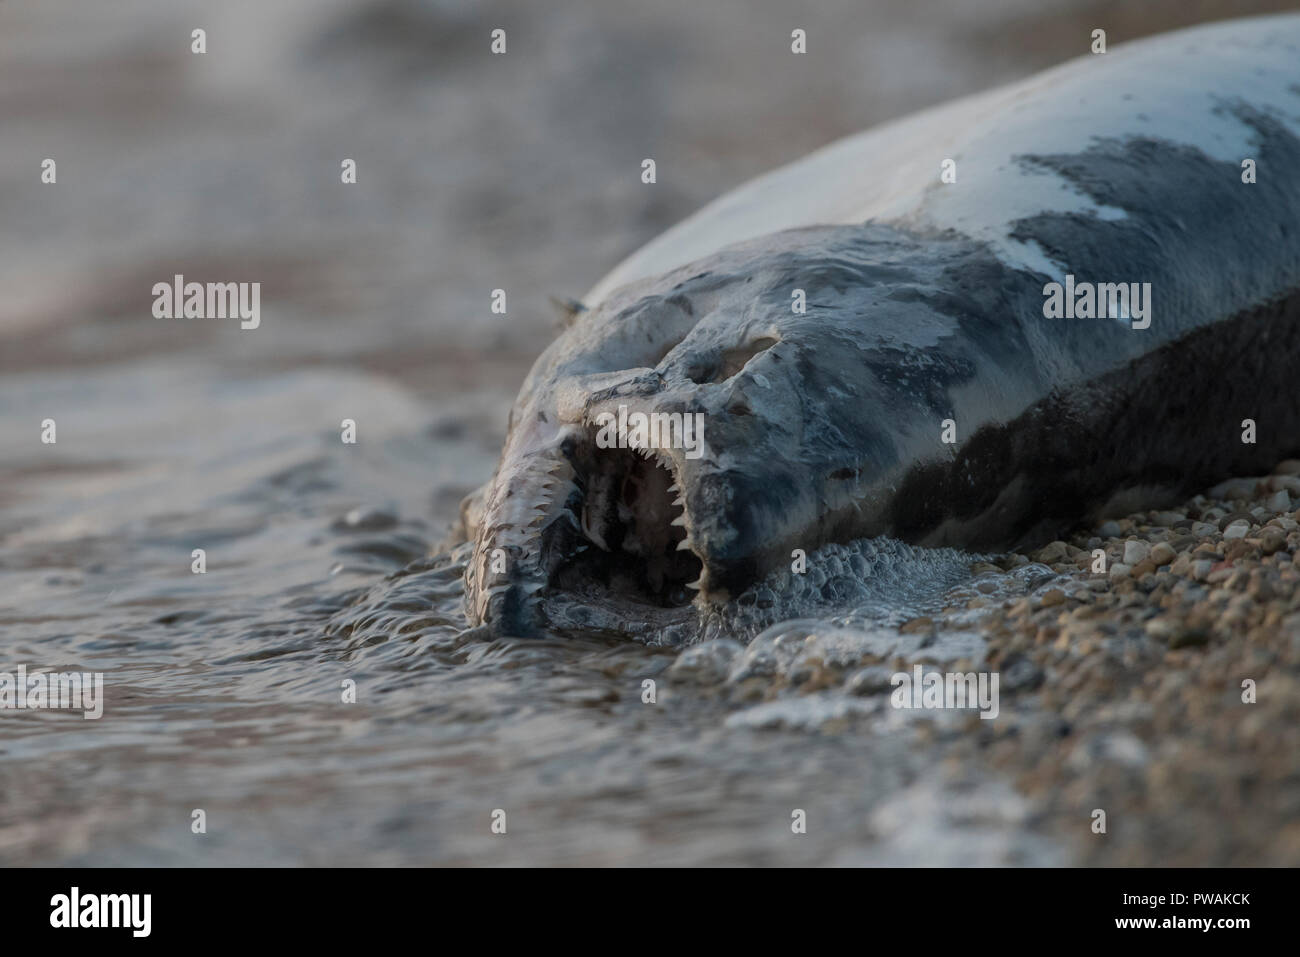 A dead Chinook Salmon (Oncorhynchus tshawytscha) that has washed up on the beach of Lake Michigan. Stock Photo